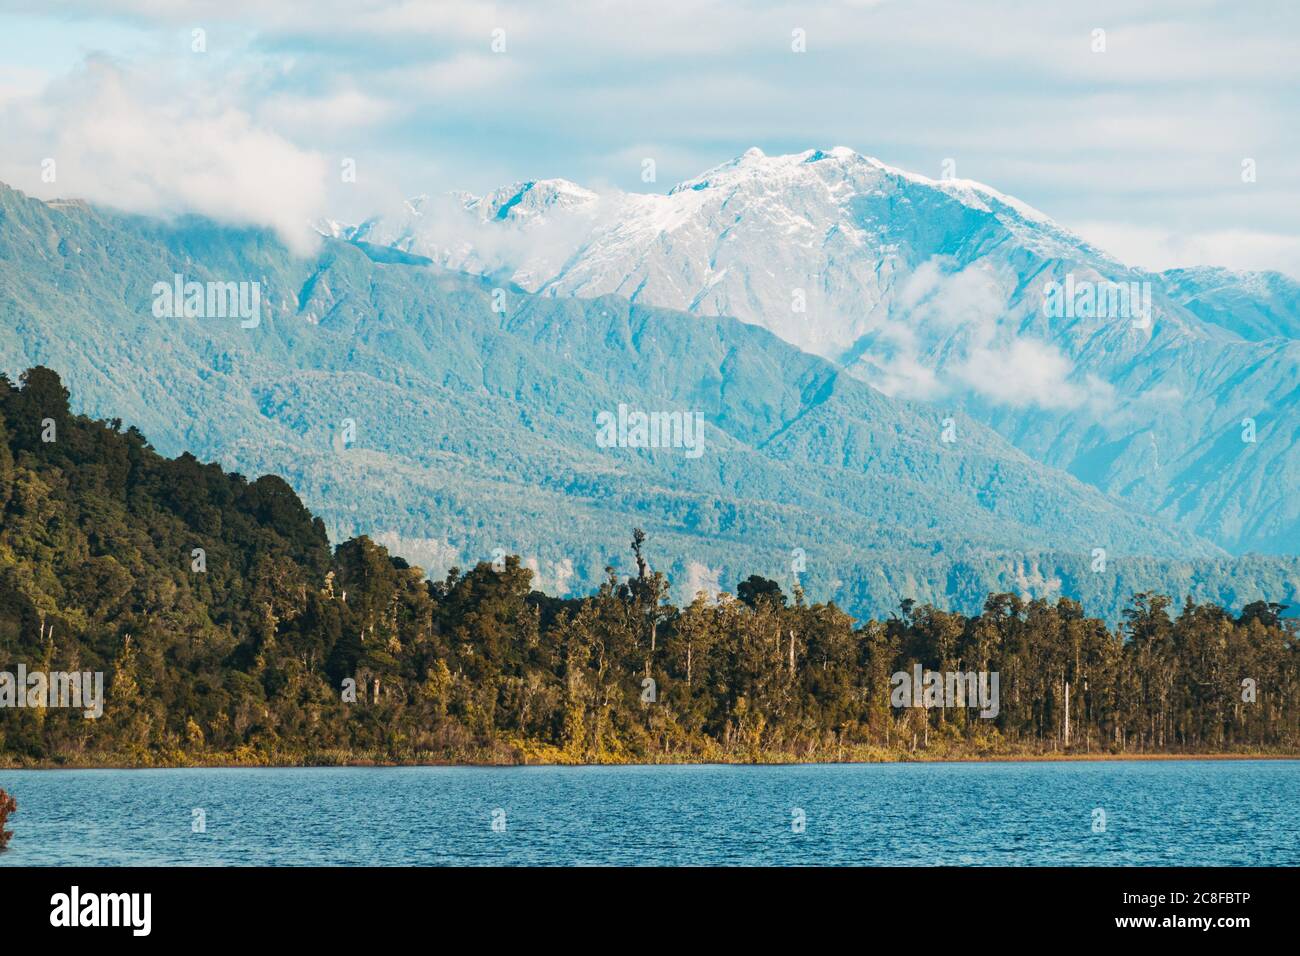 Mountains and forest at Lake Ianthe / Matahi on the southern West Coast of New Zealand Stock Photo